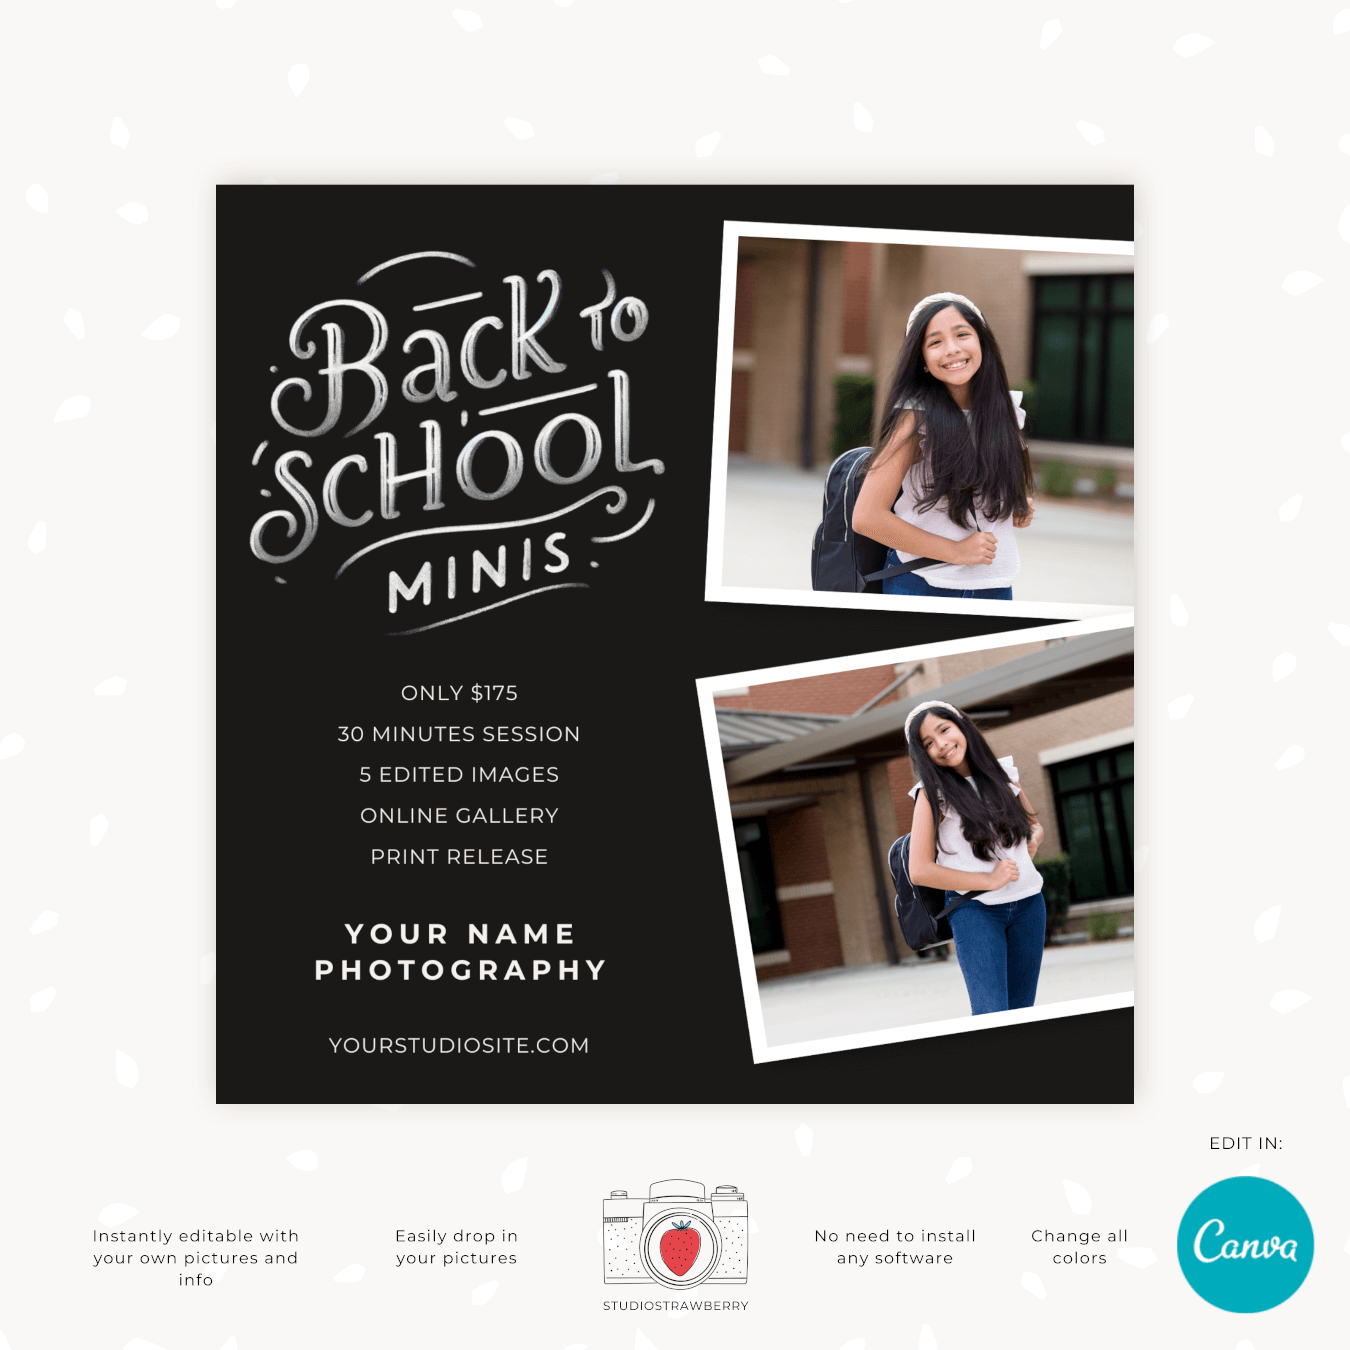 Back to School mini sessions template